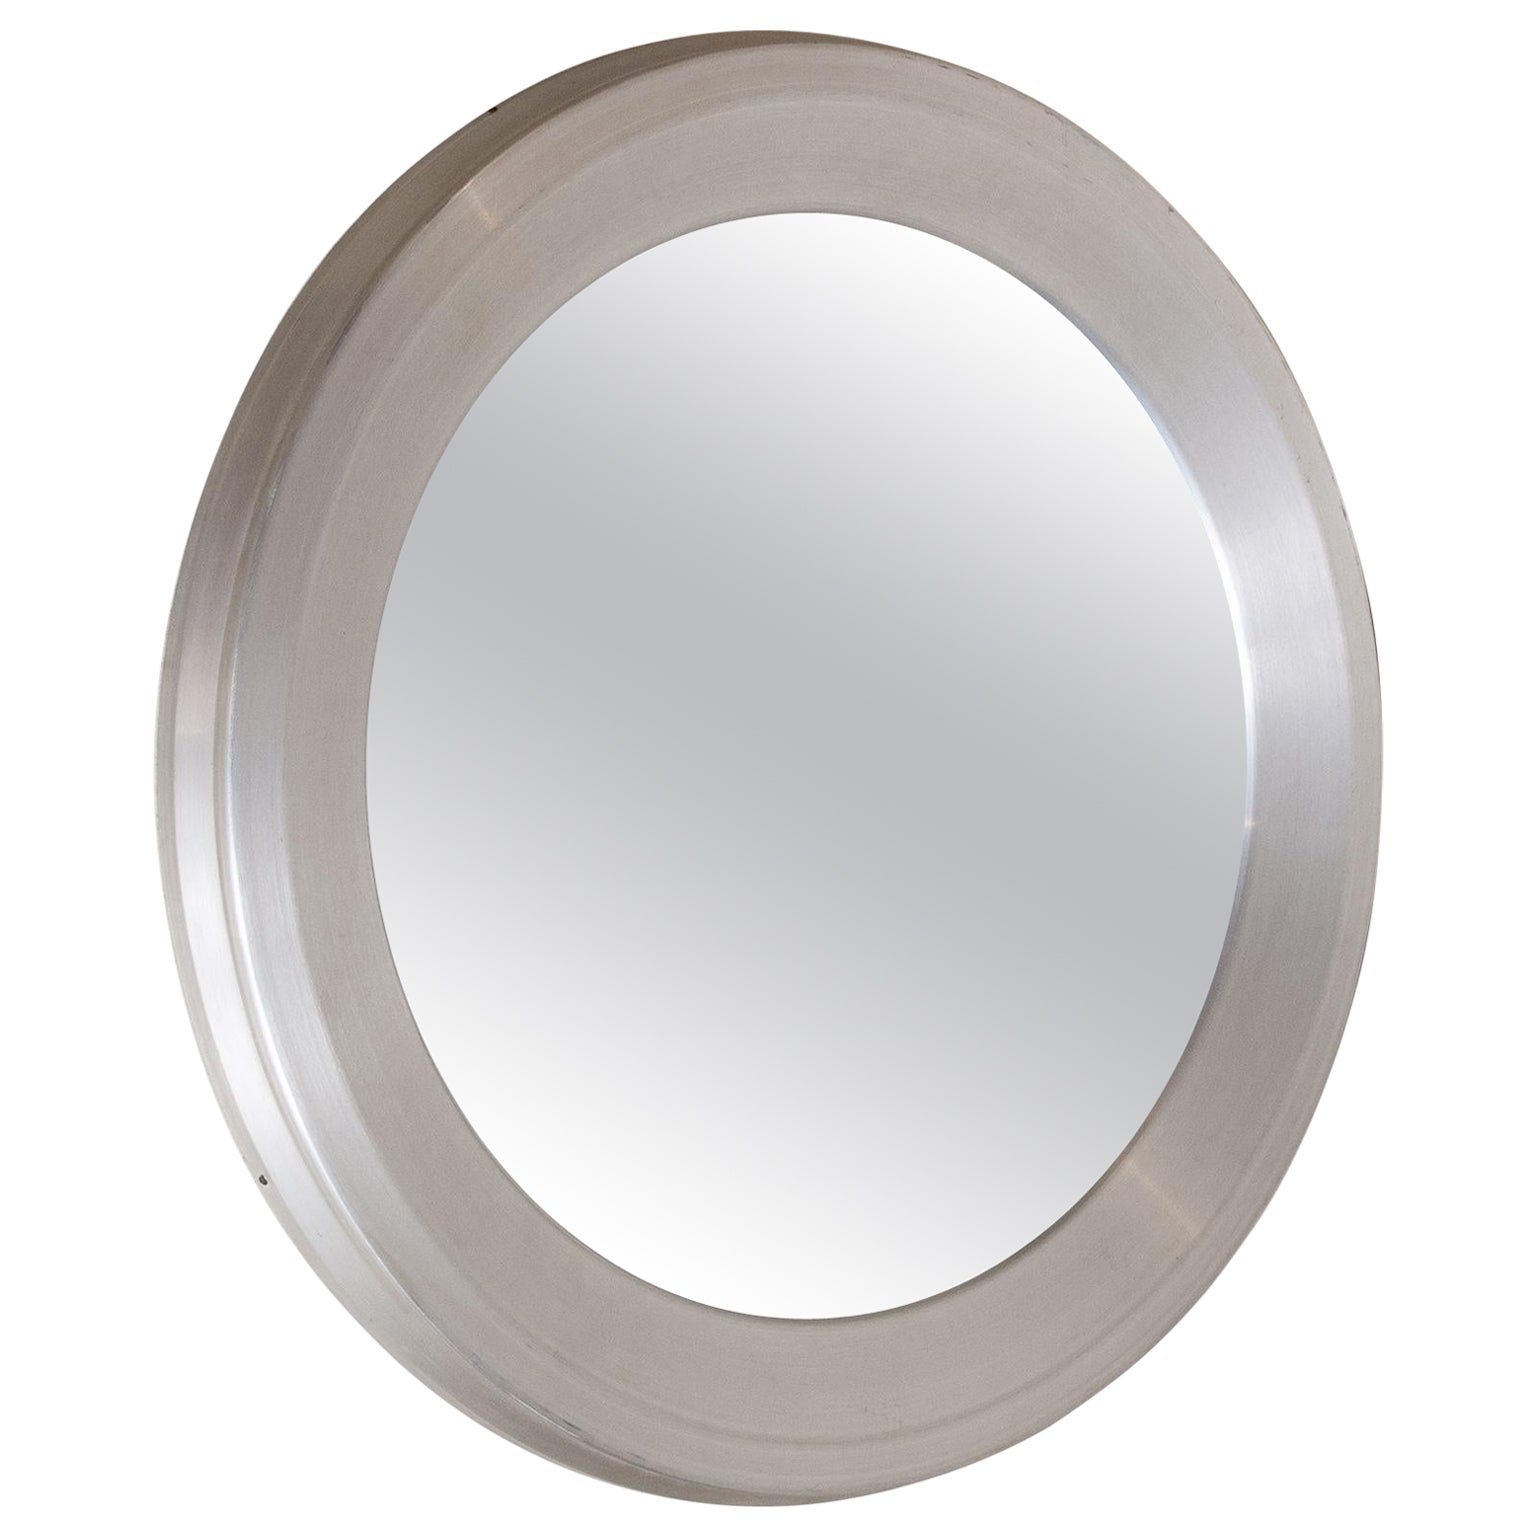 Narcissus Model Mirror, Late 1960s For Sale